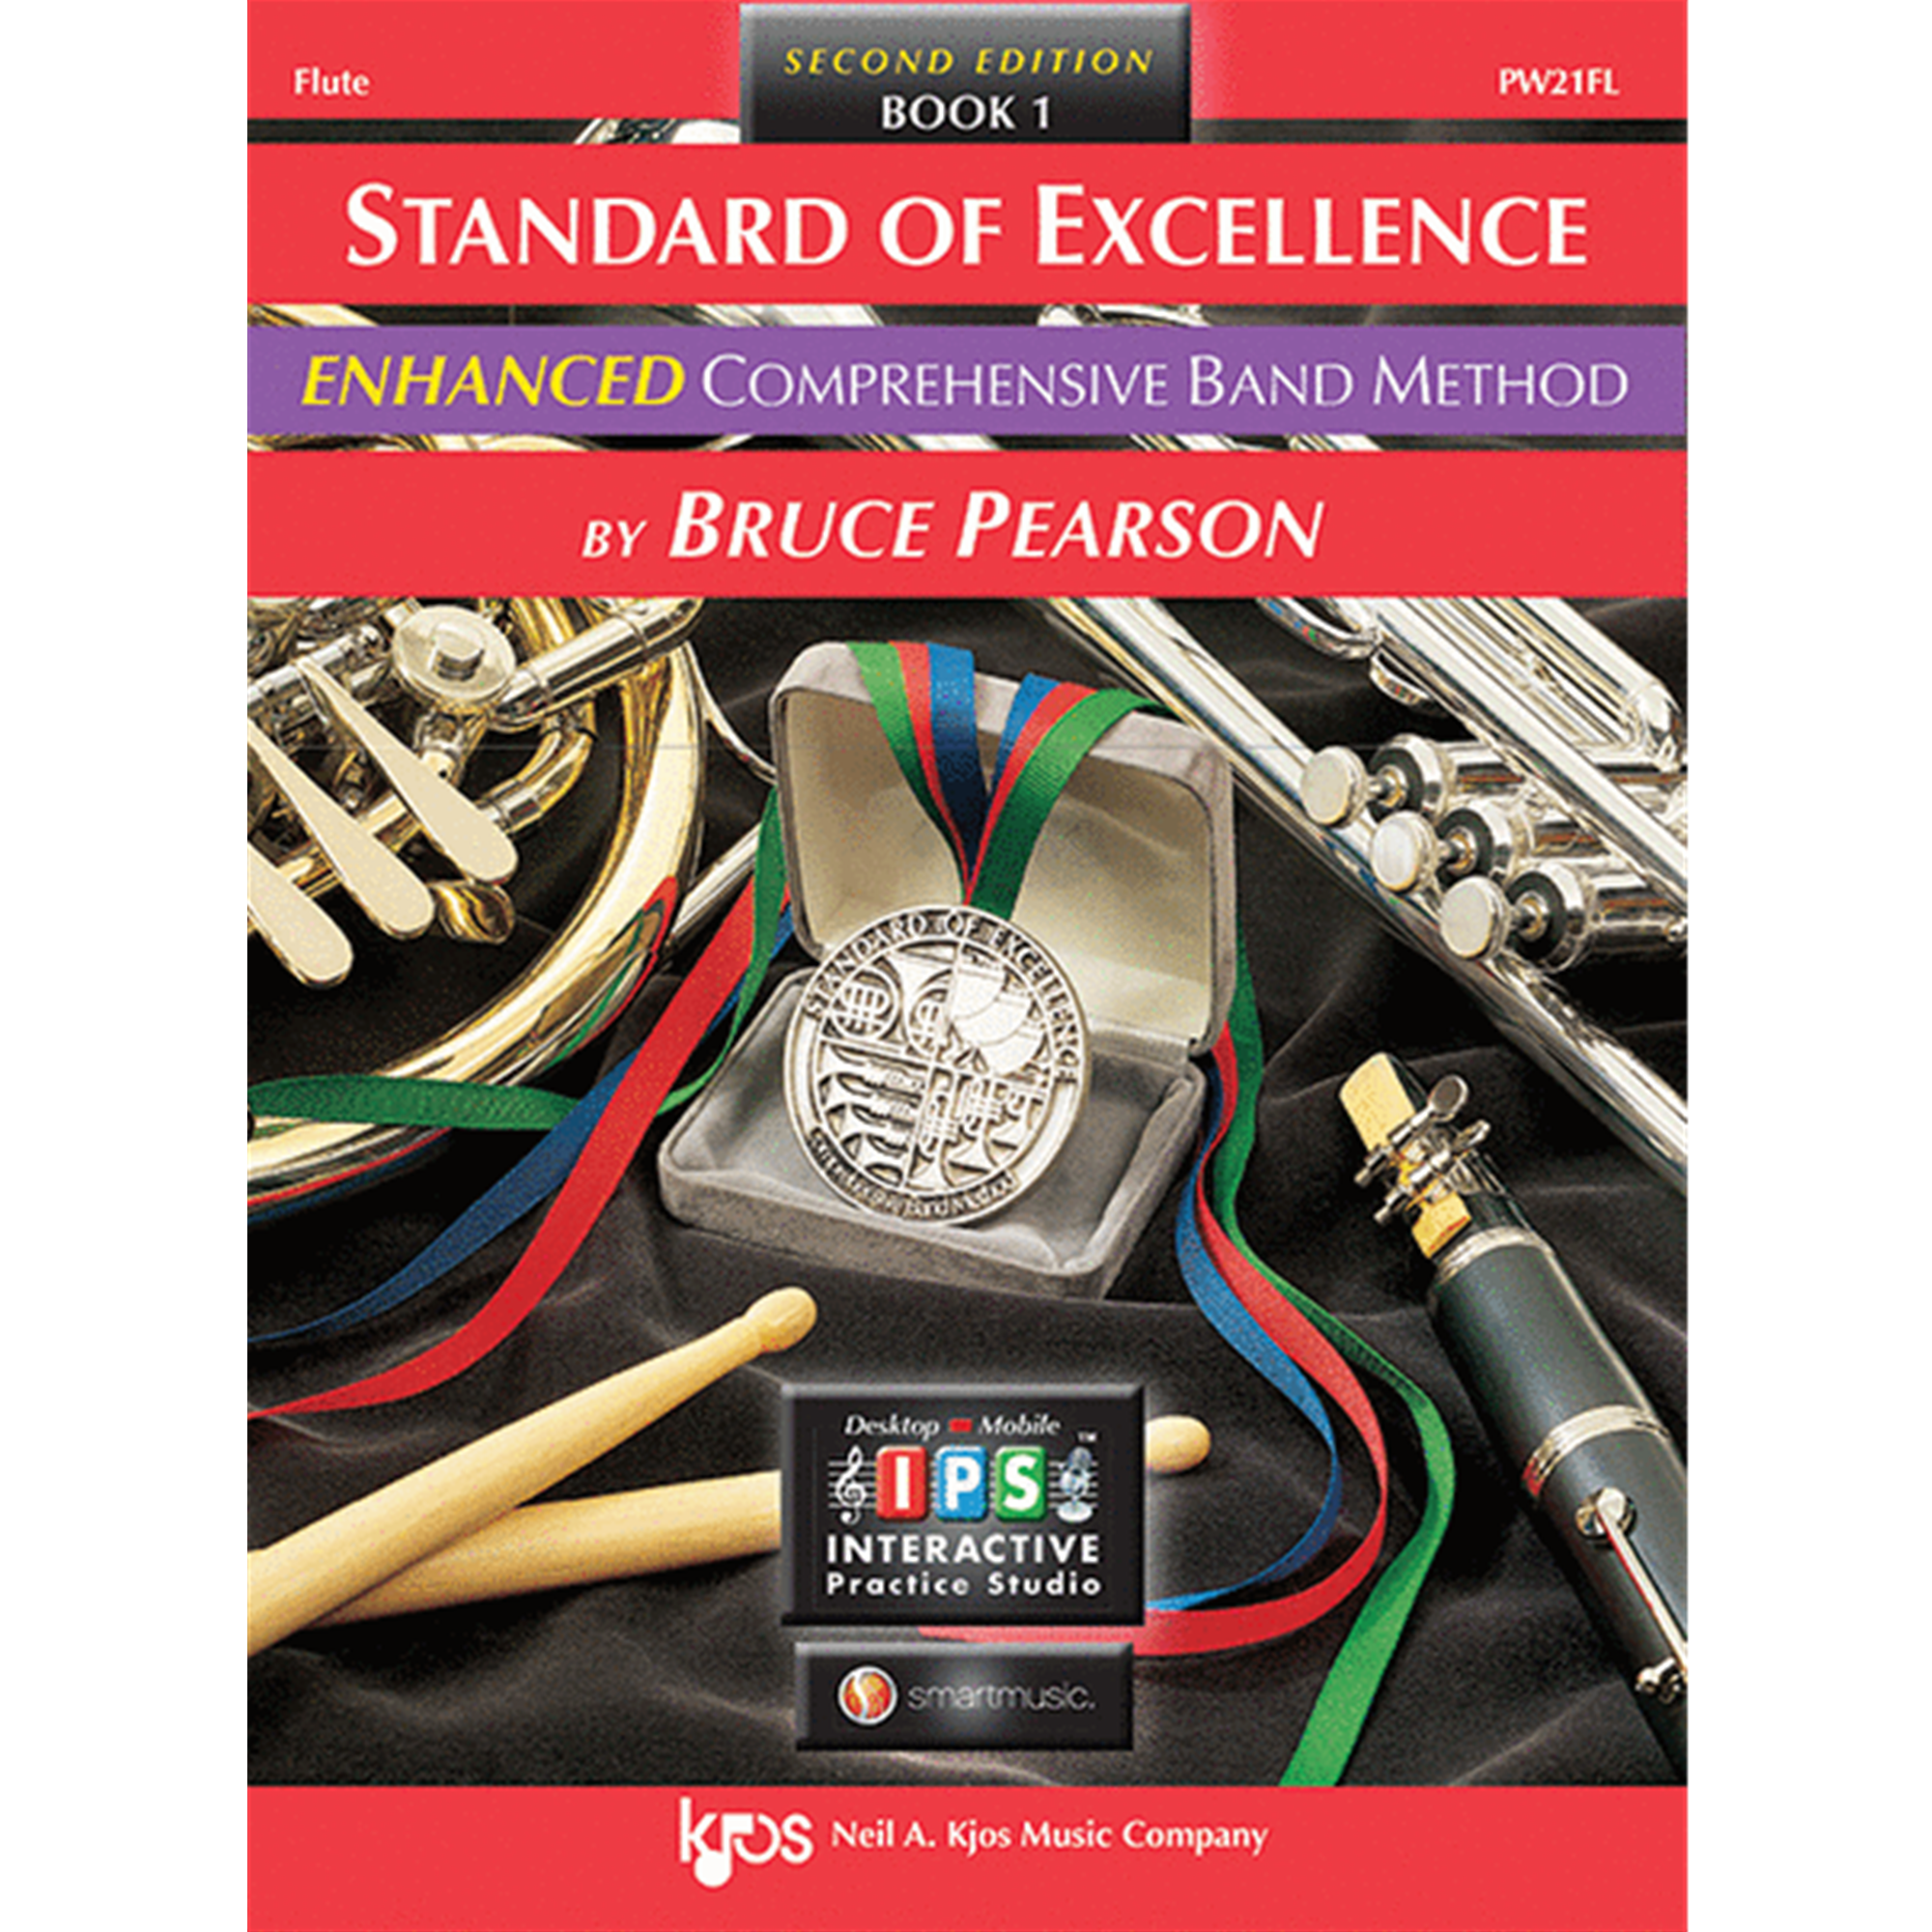 KJOS PW21FL Standard of Excellence Book 1 Flute